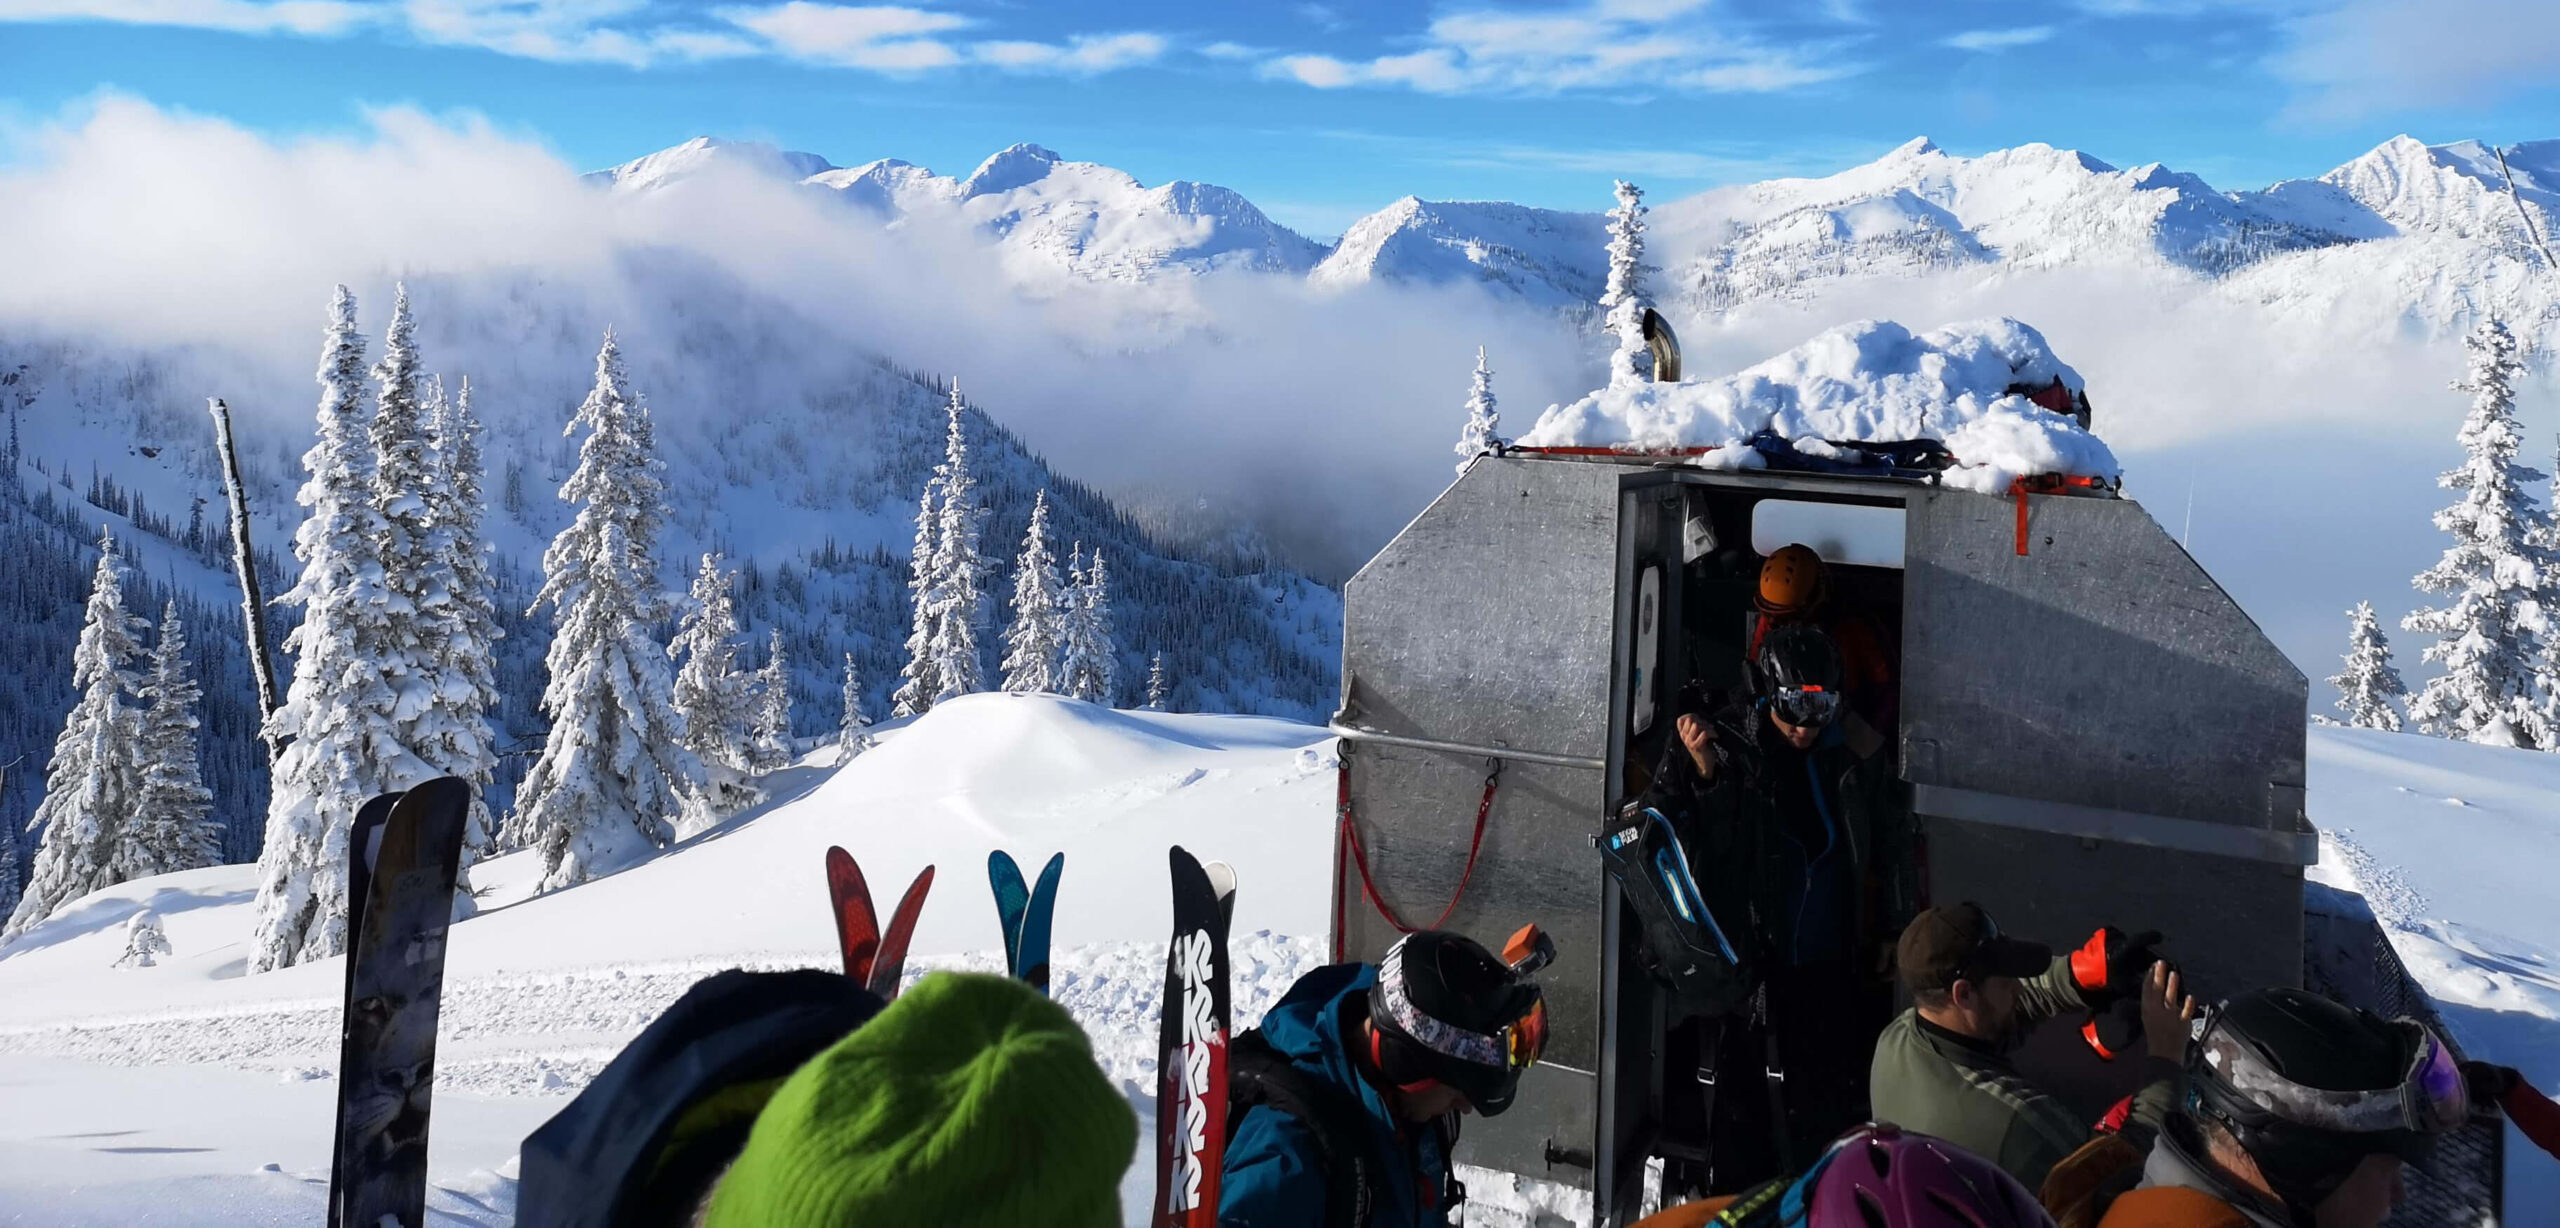 A group of skiers with K3 Cat Ski overlooking the snowy peaks of mountains over their skis.